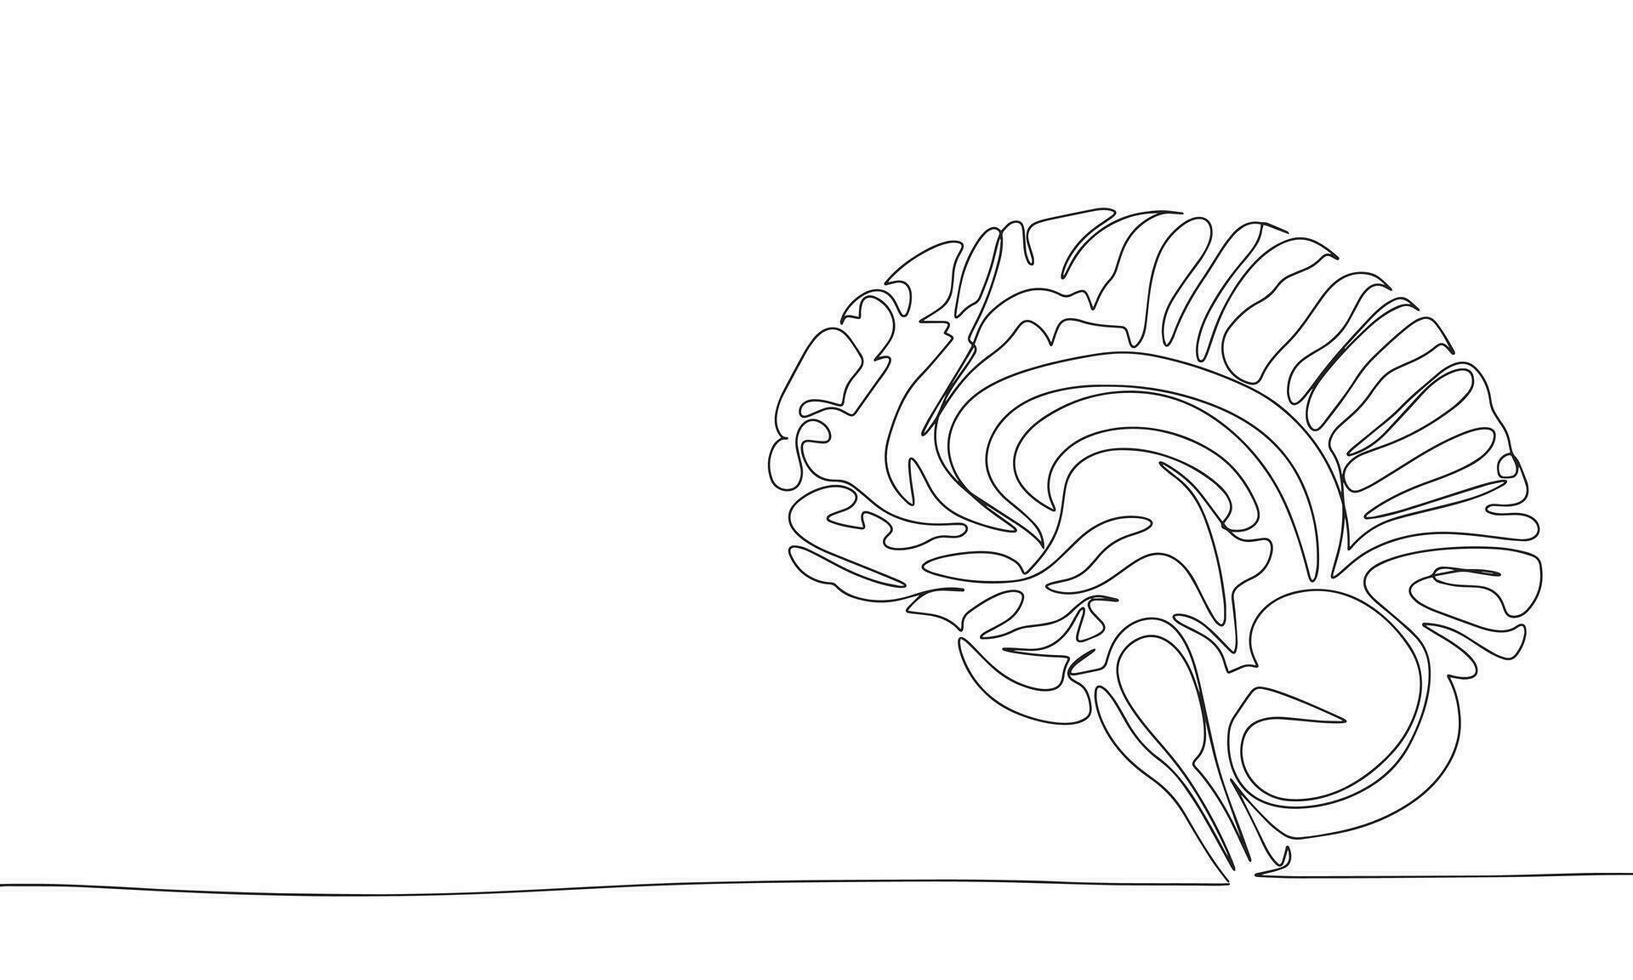 Human brain one line continuous banner. Line art human brain line art. Hand drawn vector art.